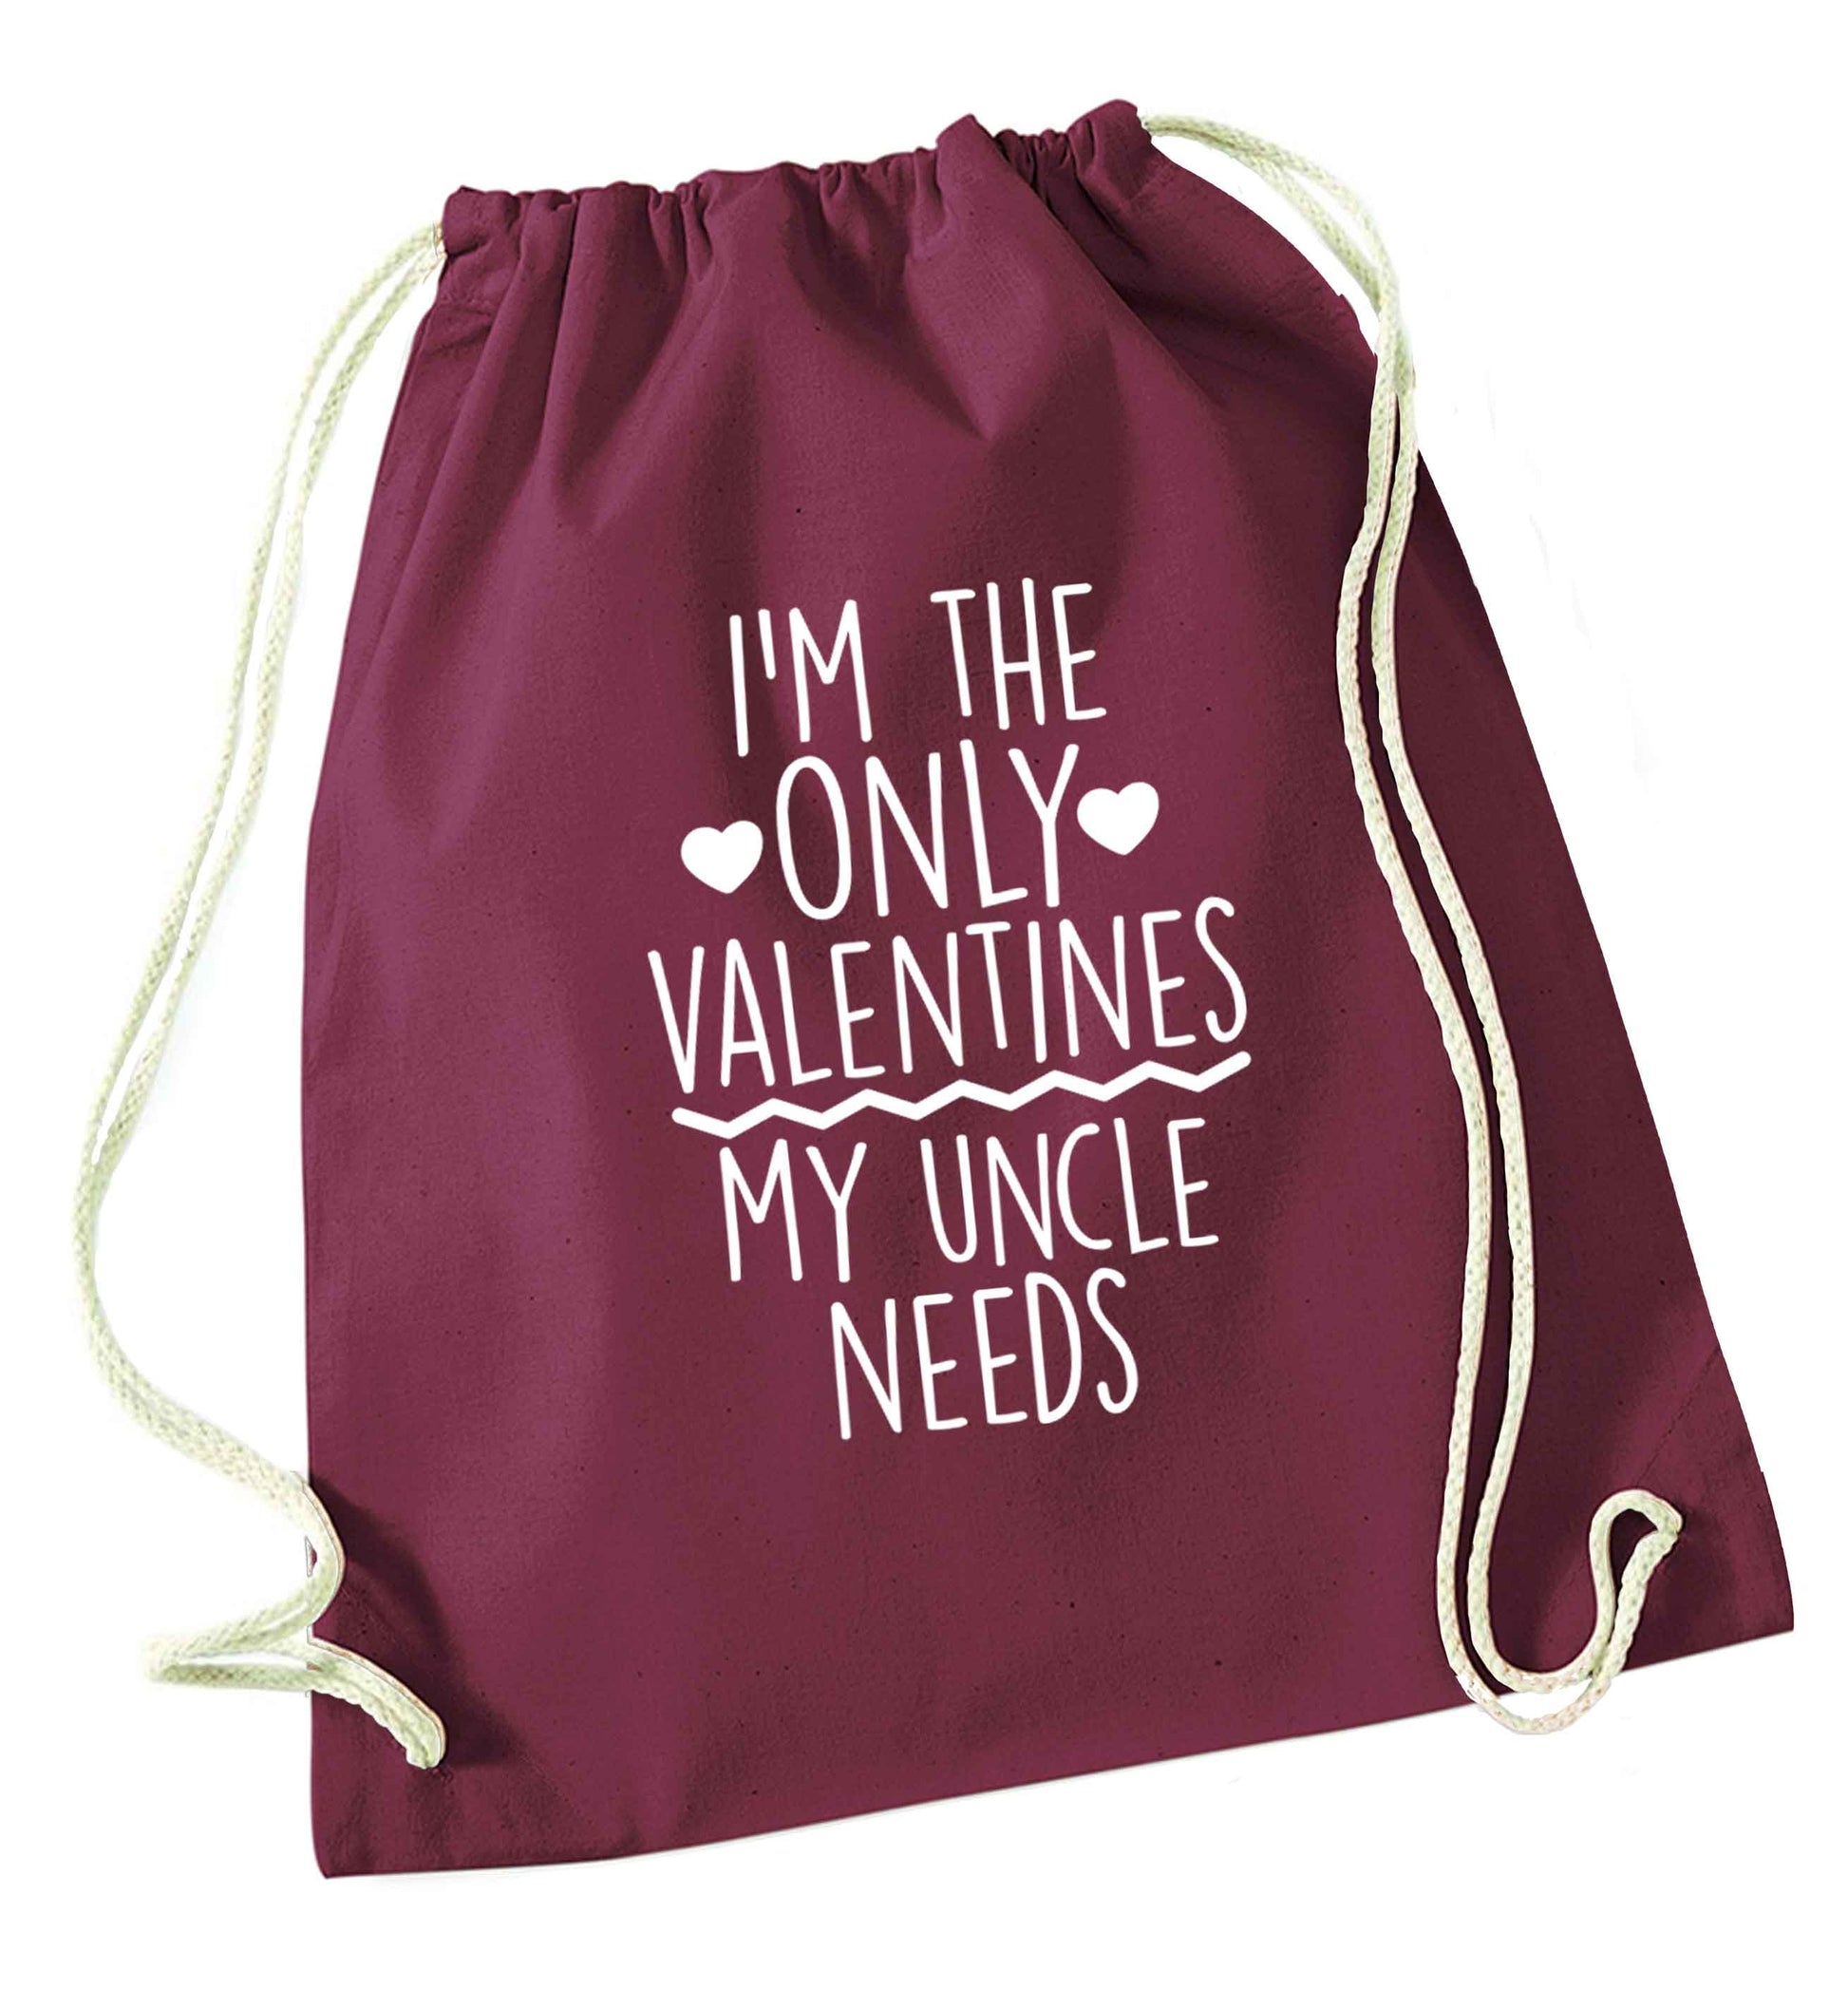 I'm the only valentines my uncle needs maroon drawstring bag